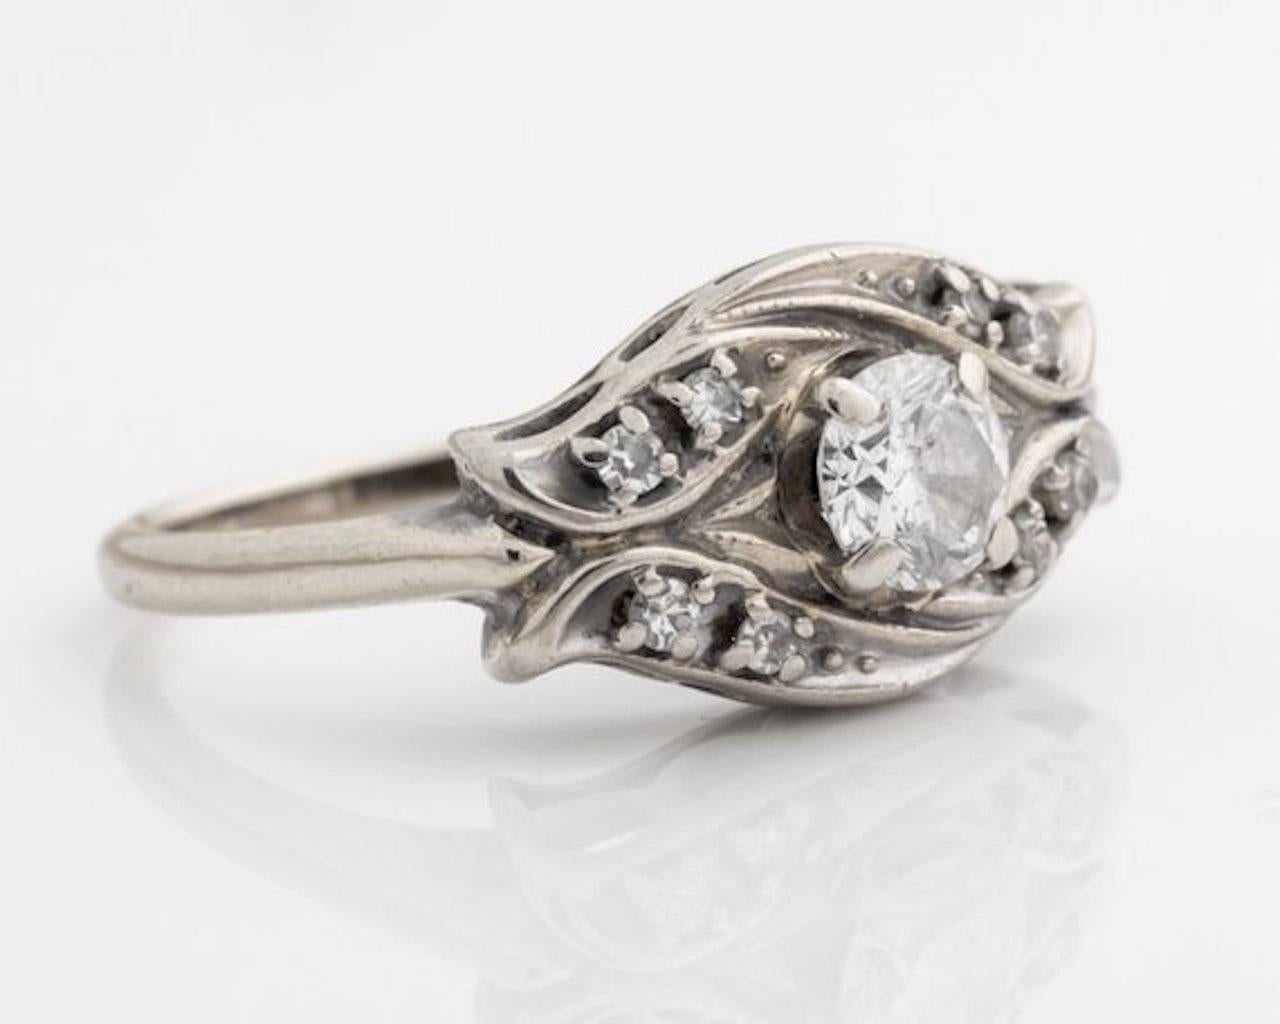 1950s 0.60 cttw Diamond Engagement Ring - 14k White Gold

The Round Brilliant Diamond center stone is securely set in an elevated four prong frame. 
Eight single cut, prong set diamond accent stones are set in pairs at each corner of the ring. 
The